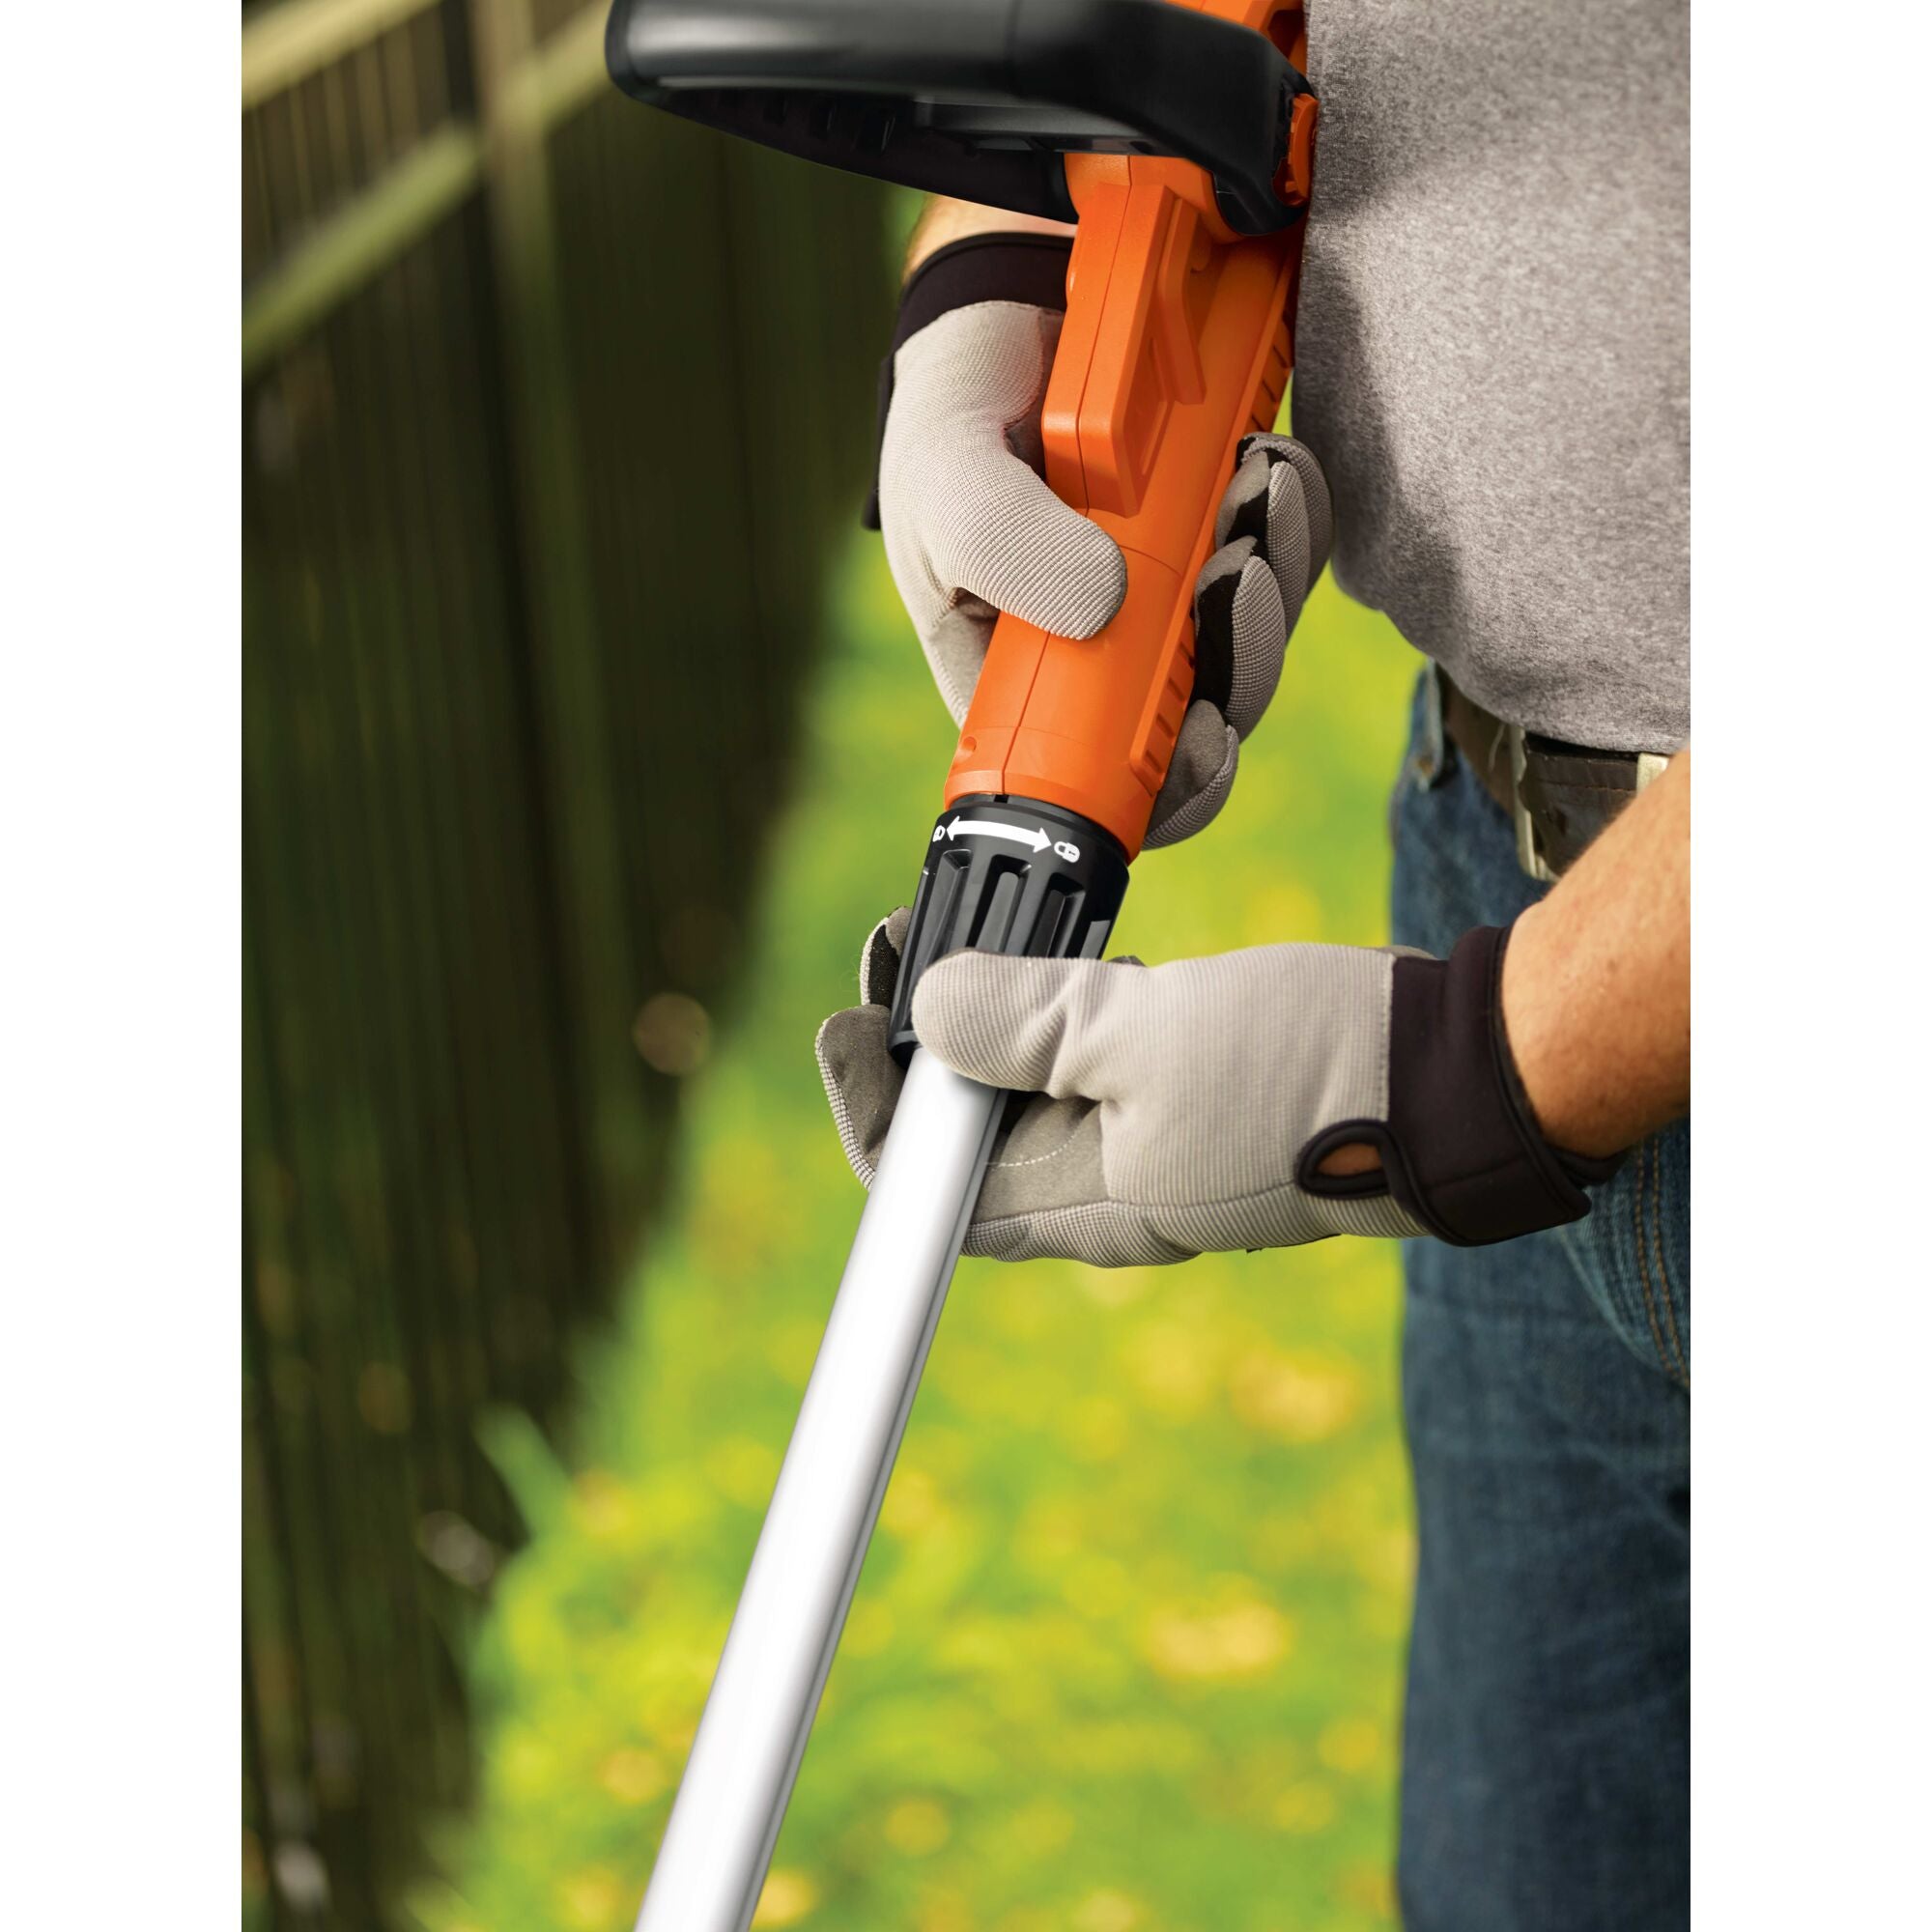 Trimmer / edger being used by a person to trim grass.\n\n